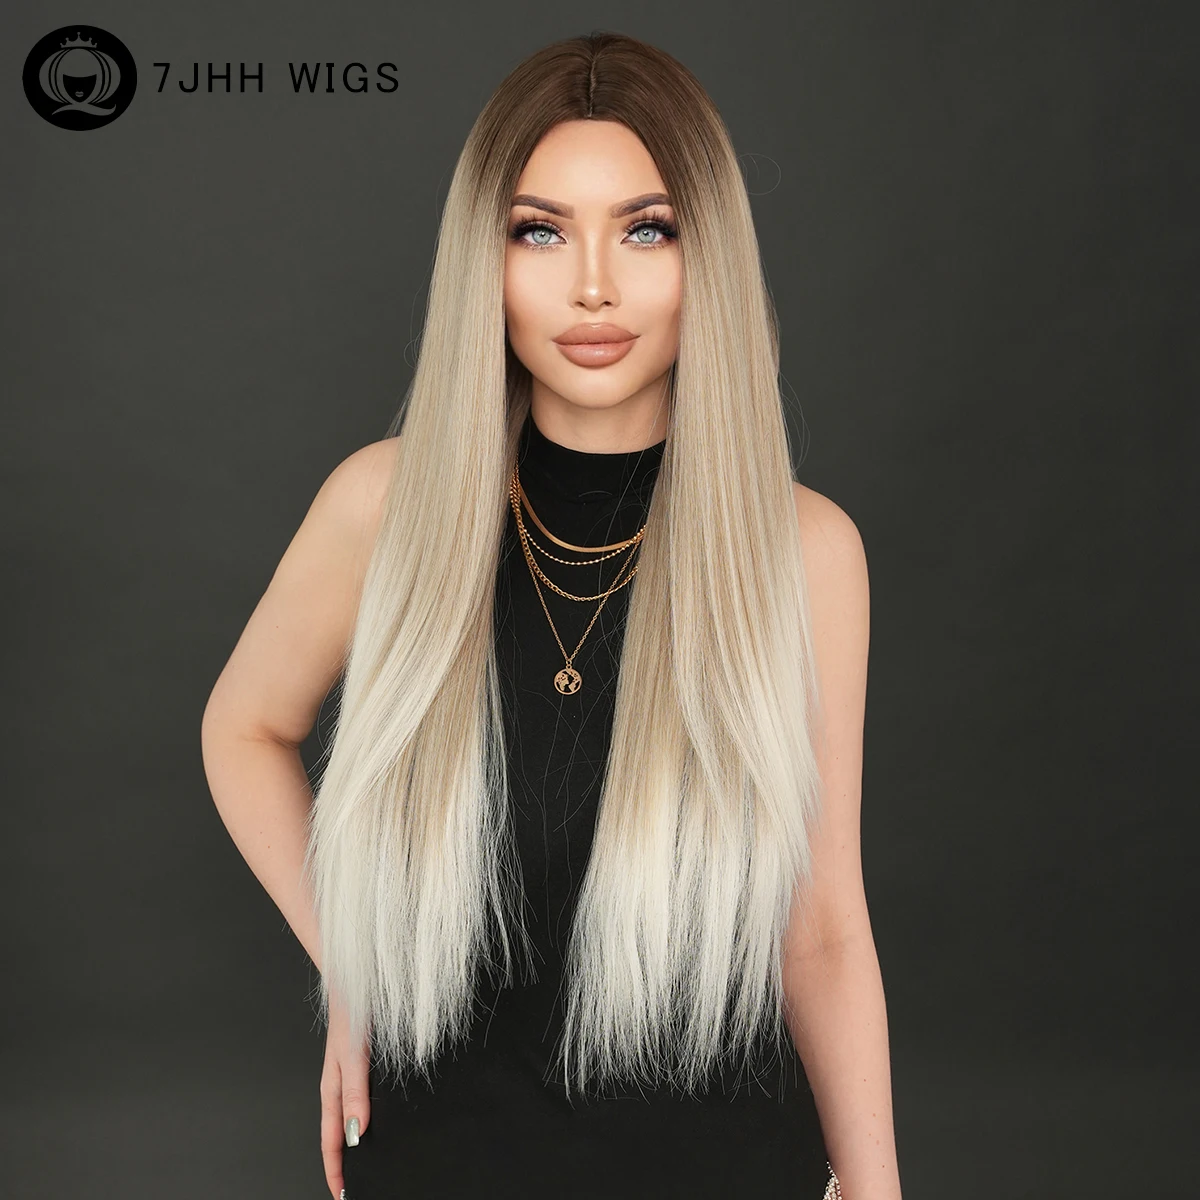 7JHH WIGS Long Straight Blonde Ombre Champagne for Women Daily Party High Density Synthetic Layered Hair Wigs with Dark Roots